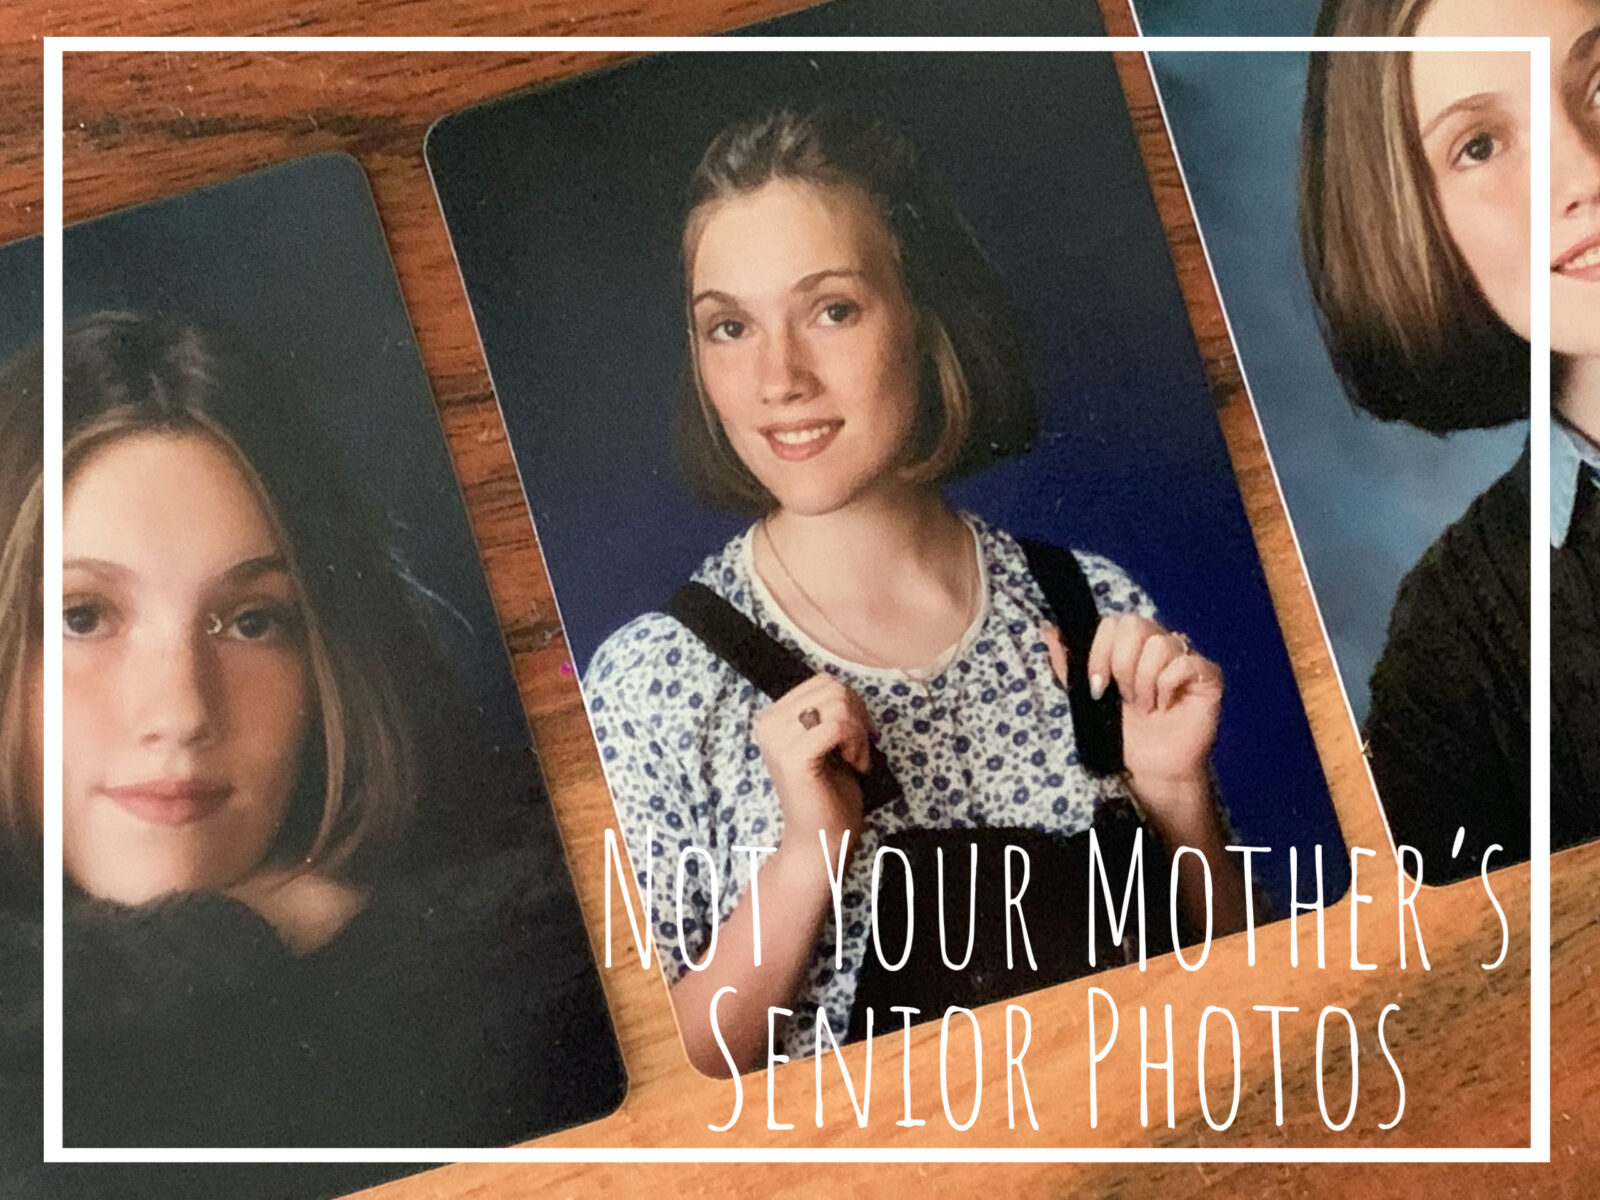 You are currently viewing Shocker: Senior Photos Have Evolved Since Your Mom was in High School